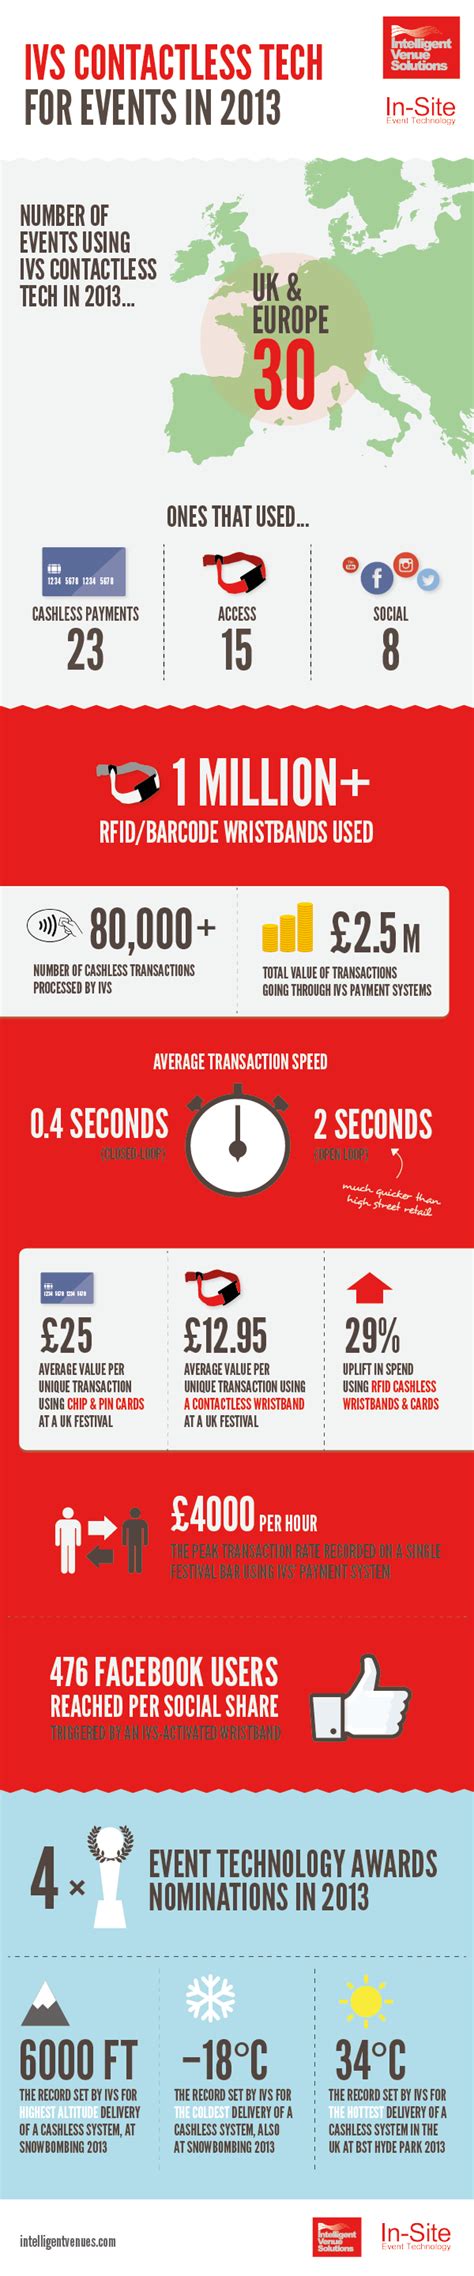 intelligent venue solutions   infographic  contactless